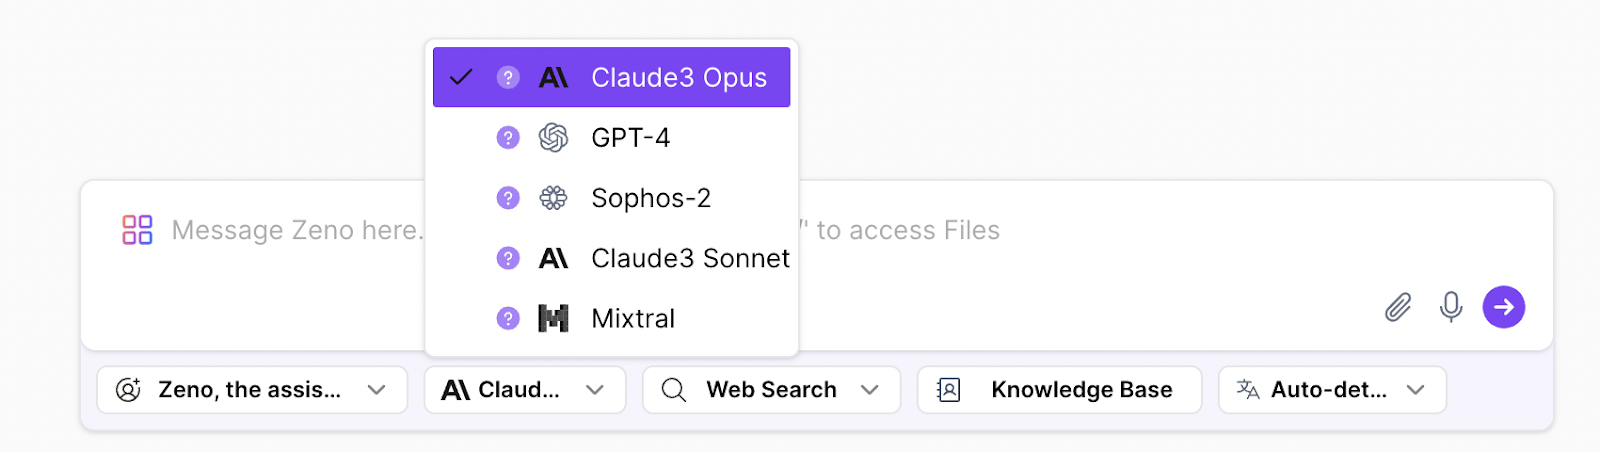 how to access claude 3